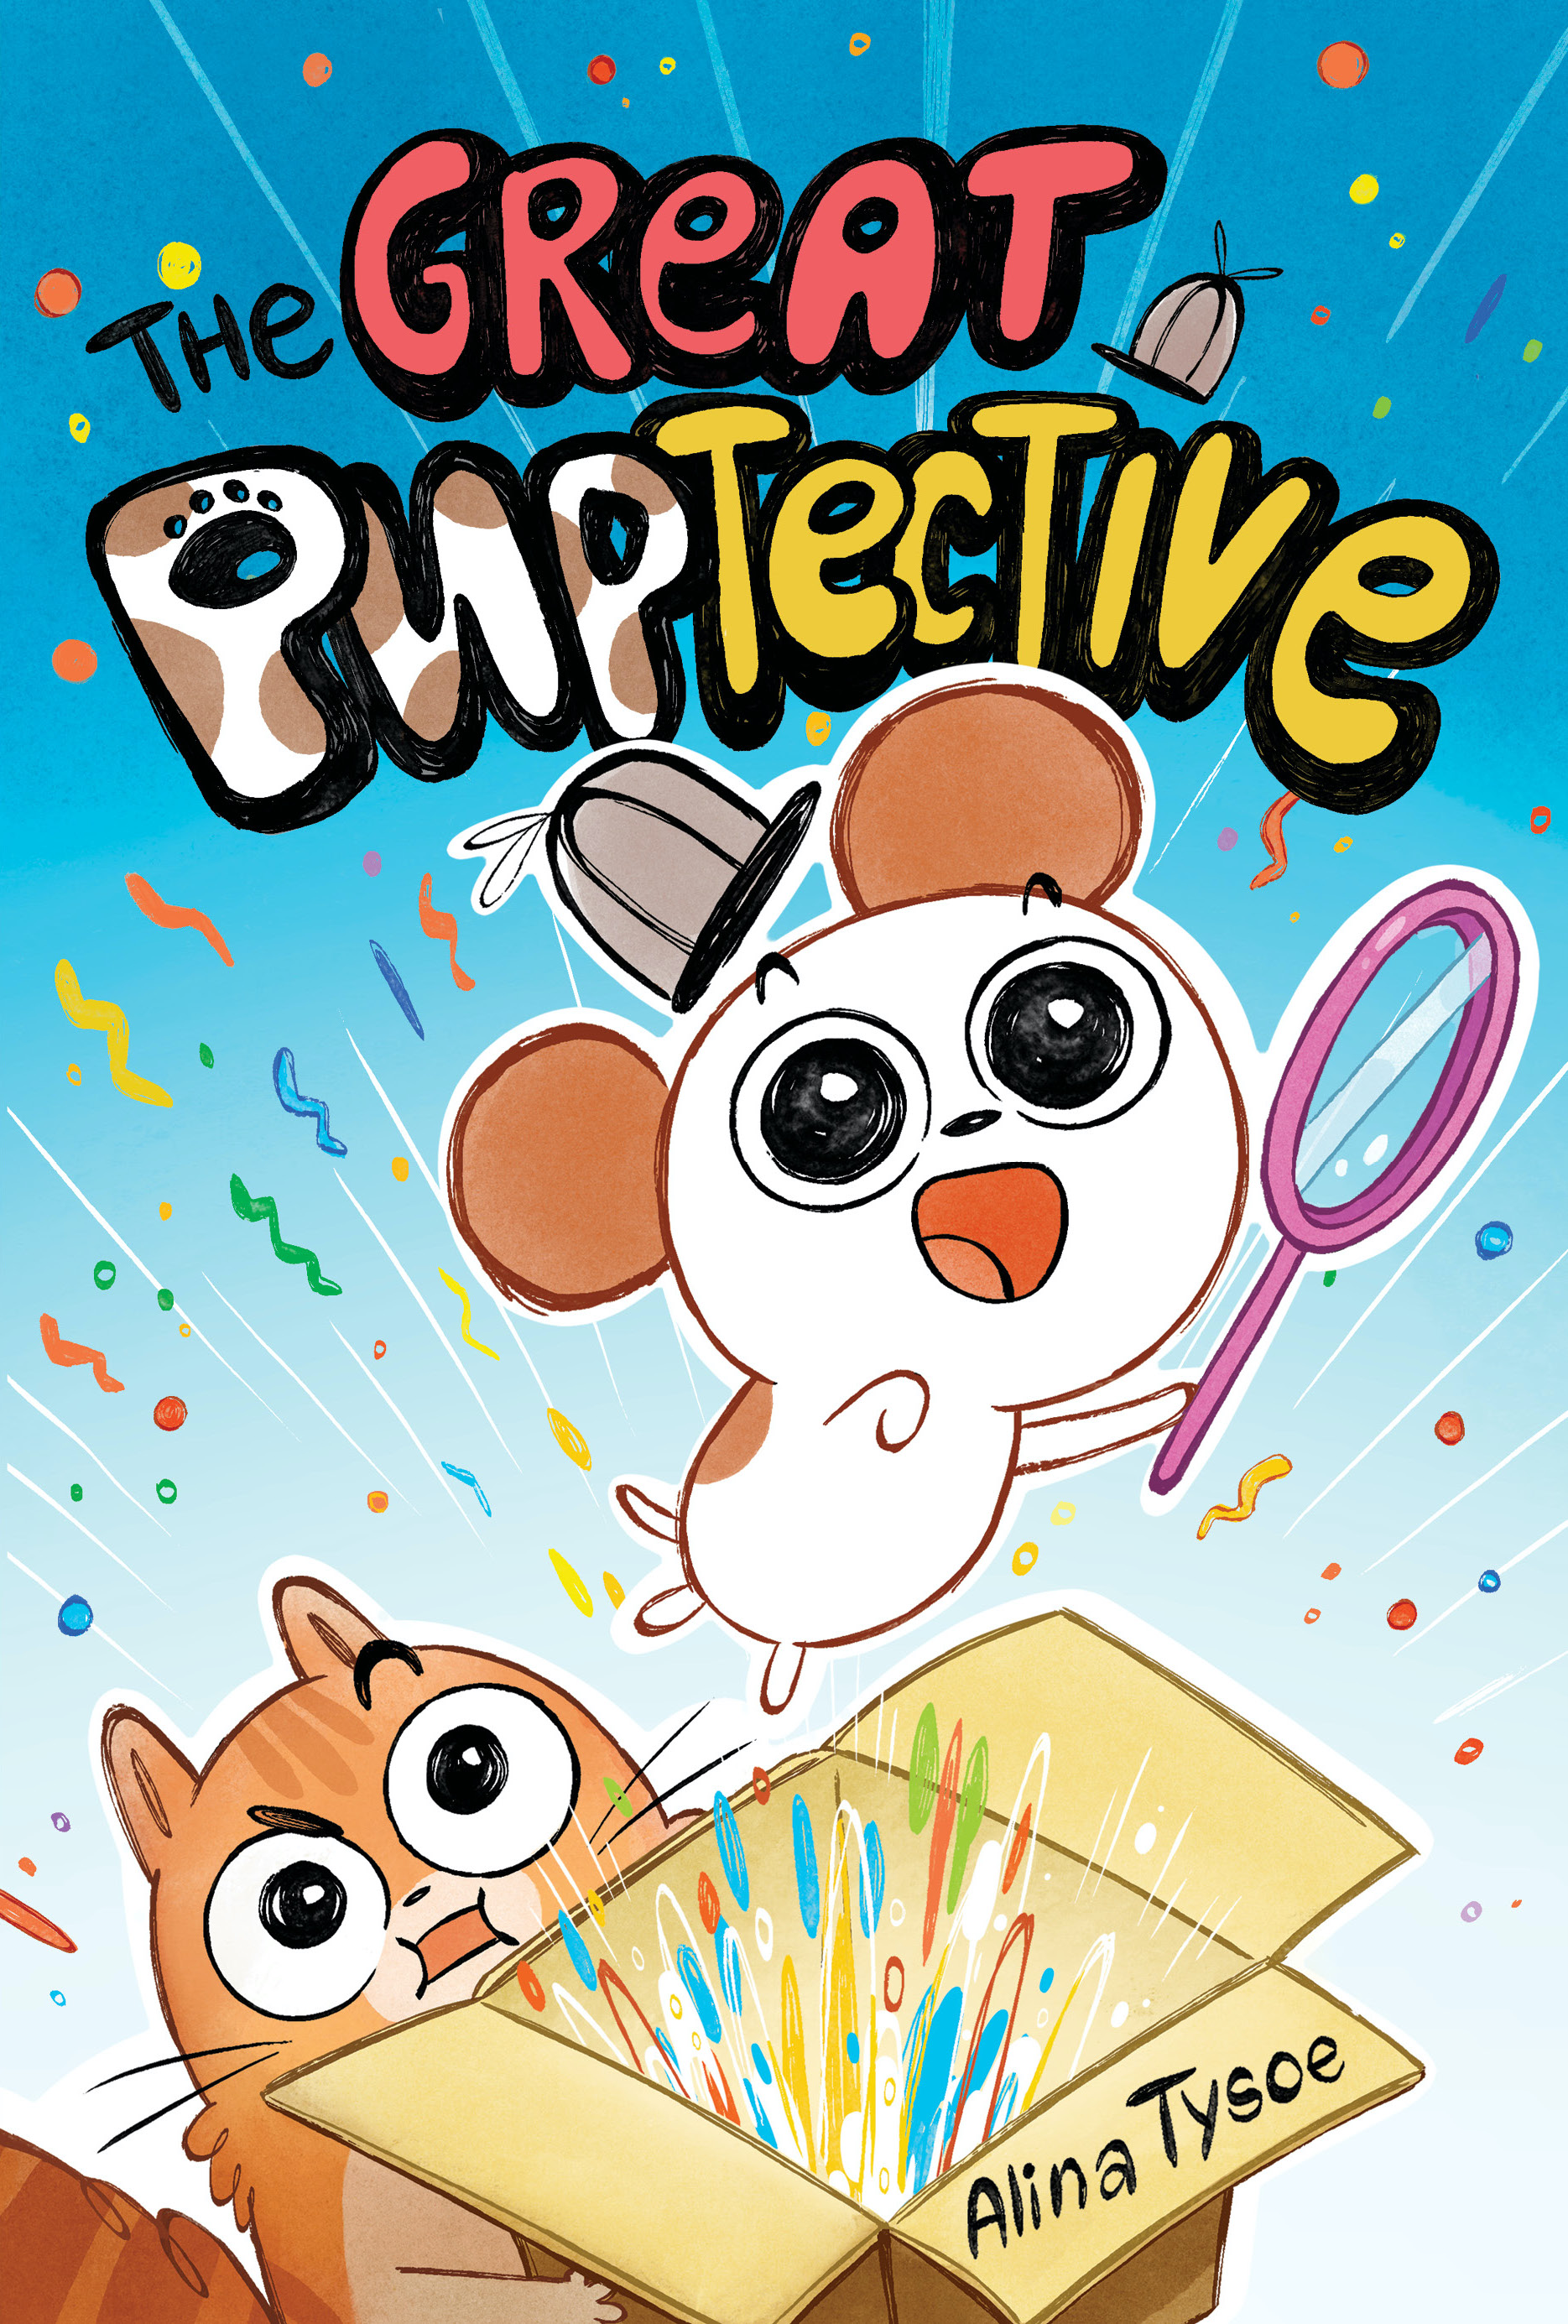 Cover of the Great Puptective